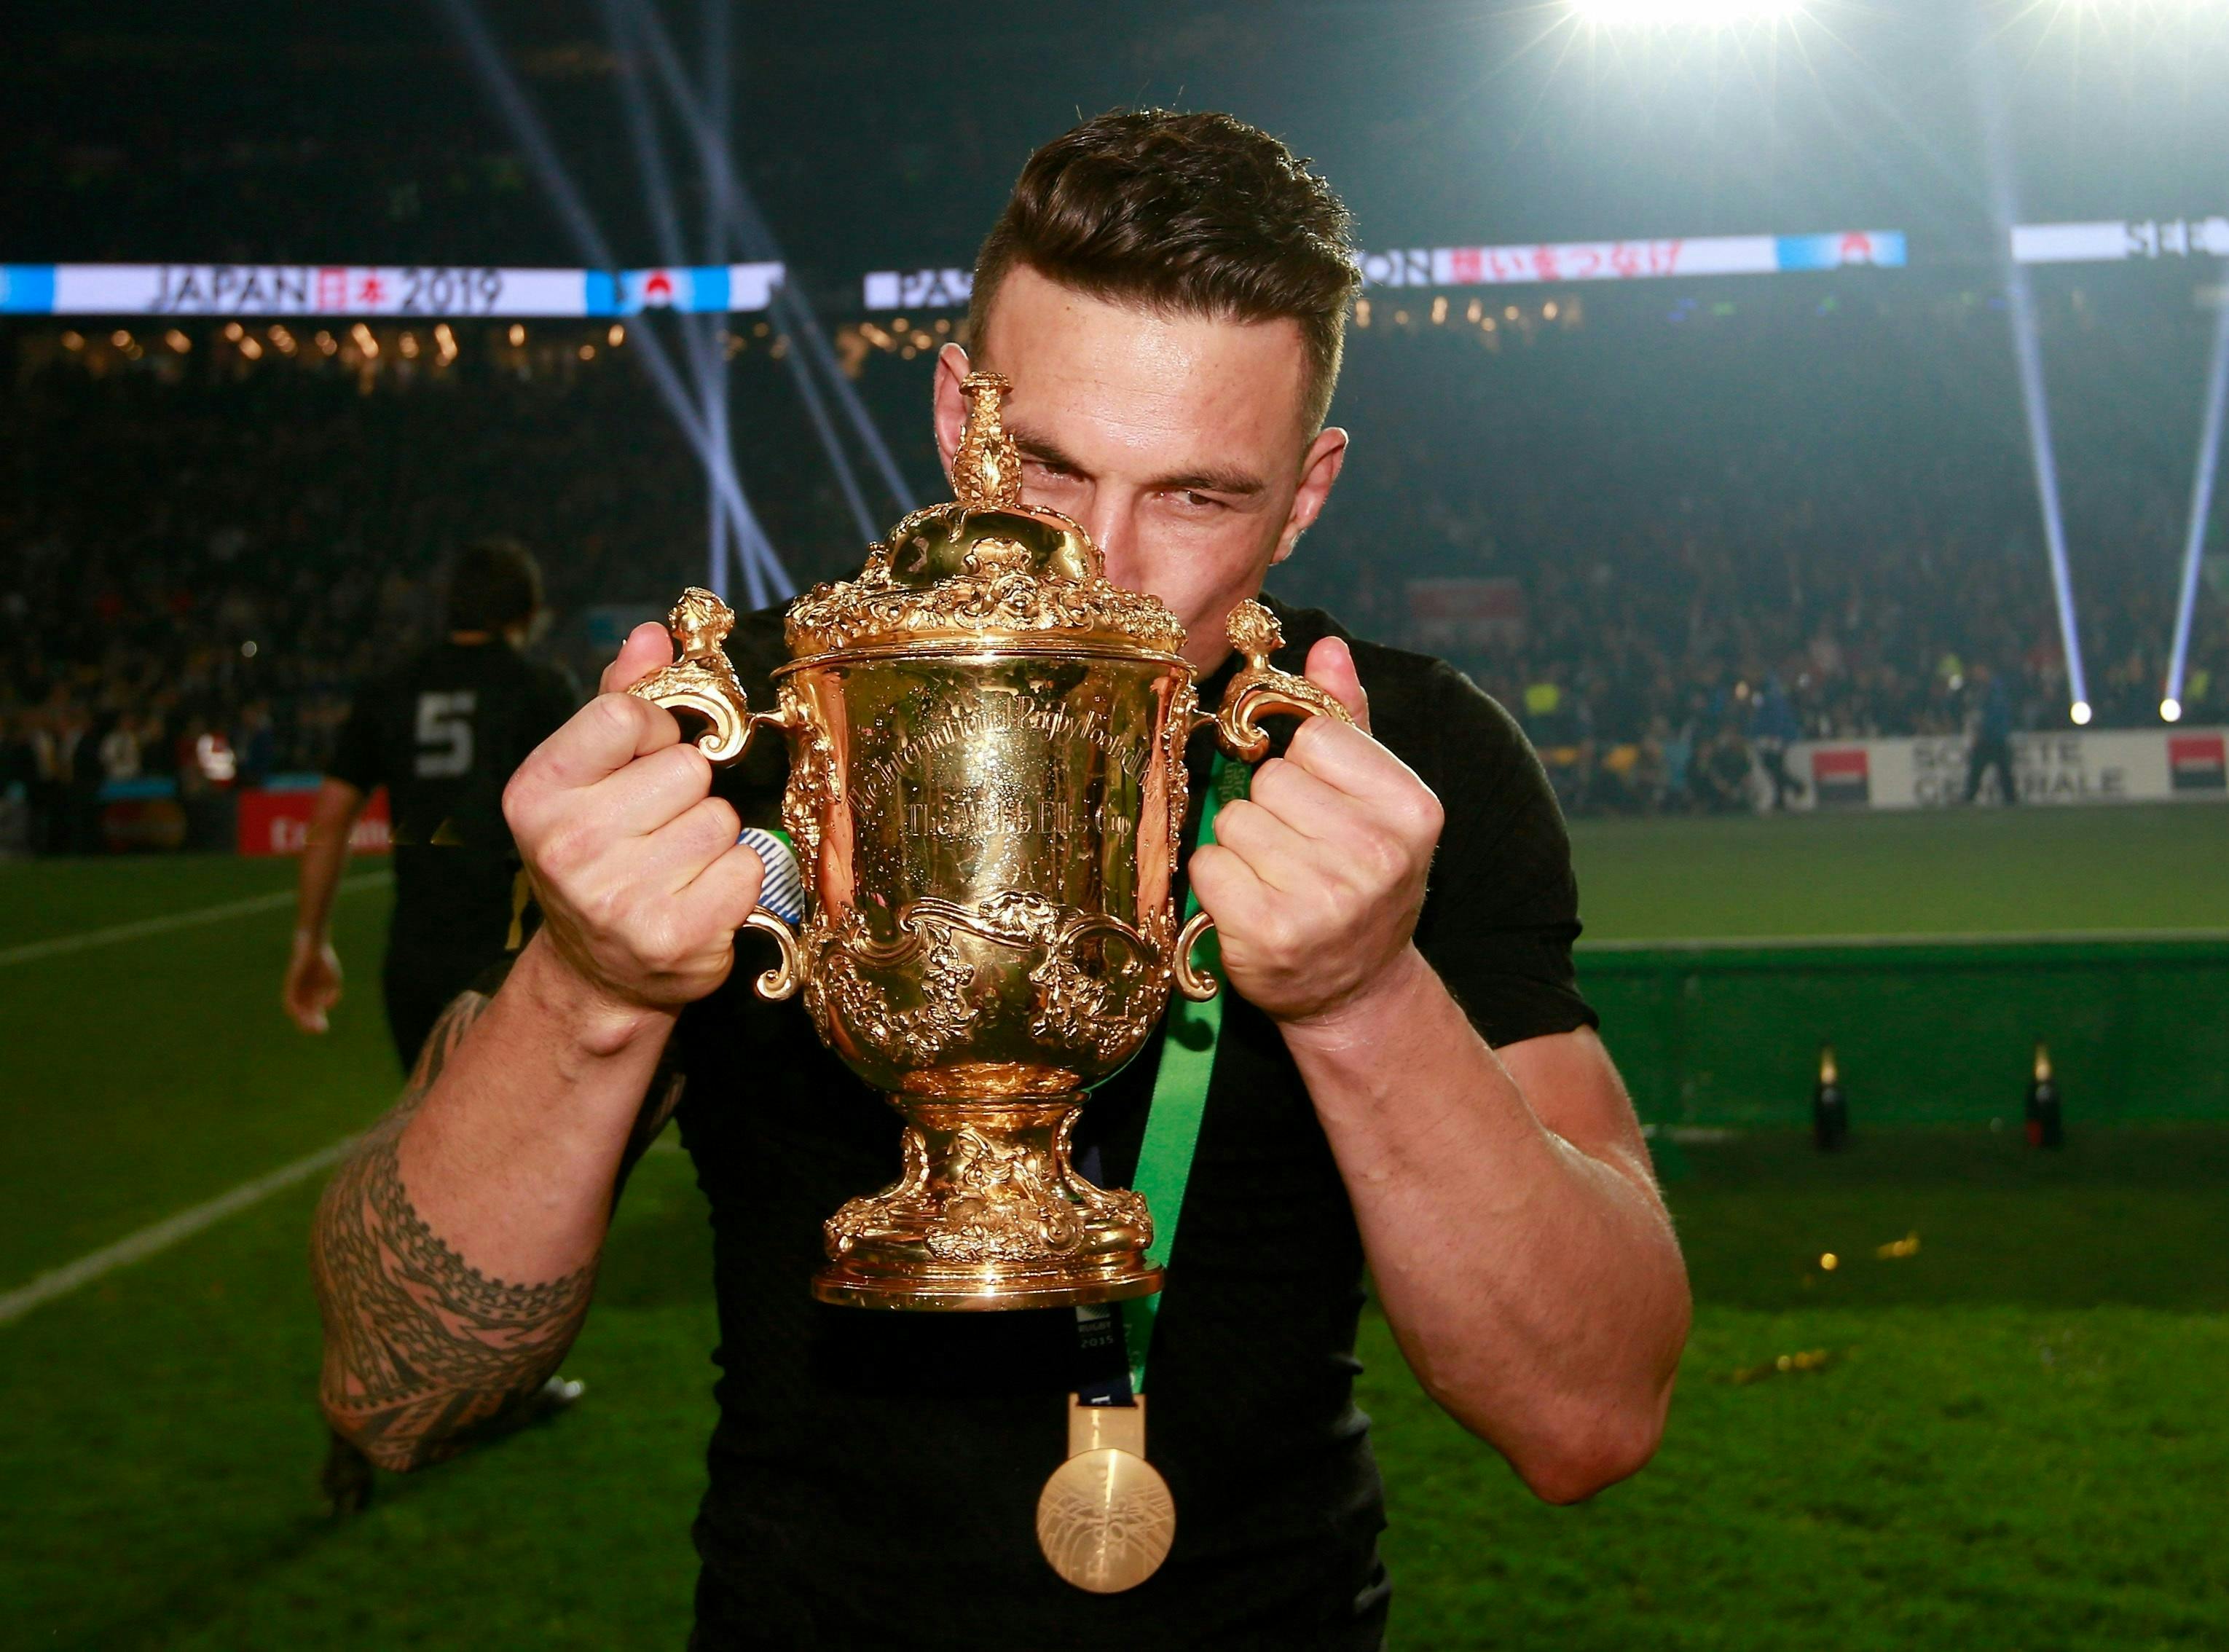 all blacks wallabies trophy rugby world cup rugby world cup 2015 london england person human